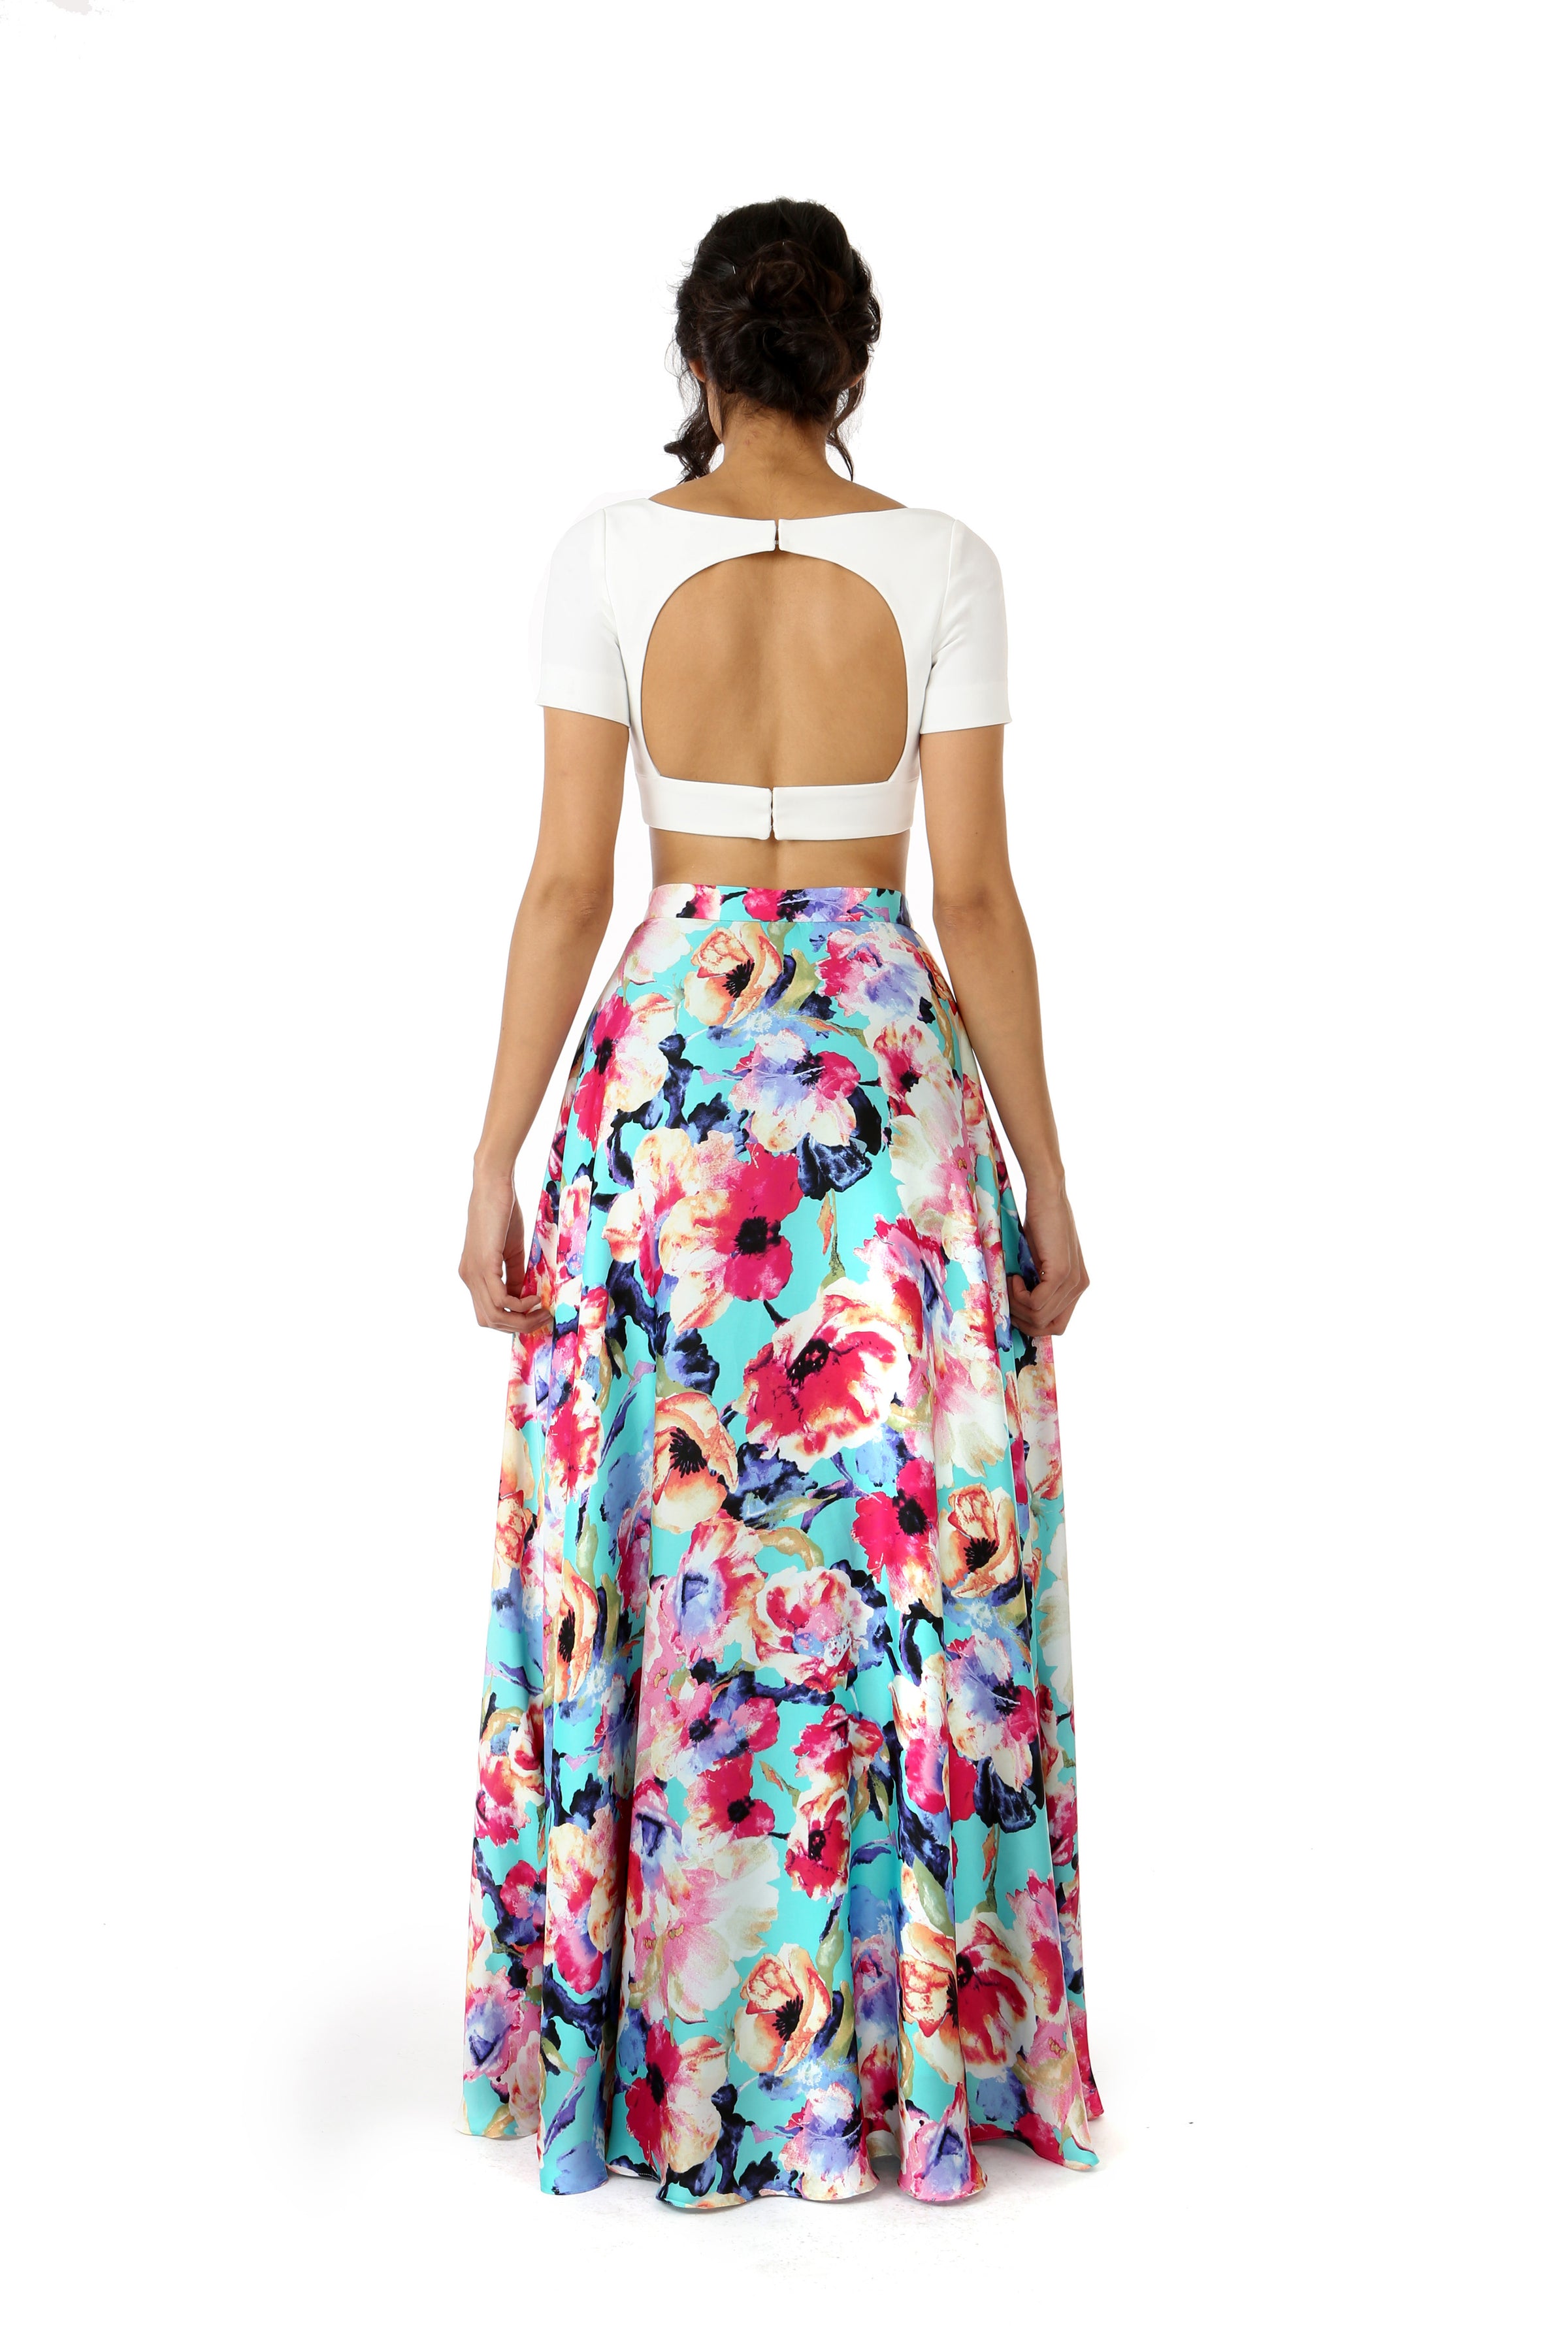 RIVA white stretch woven lehenga crop top with open back | HARLEEN KAUR